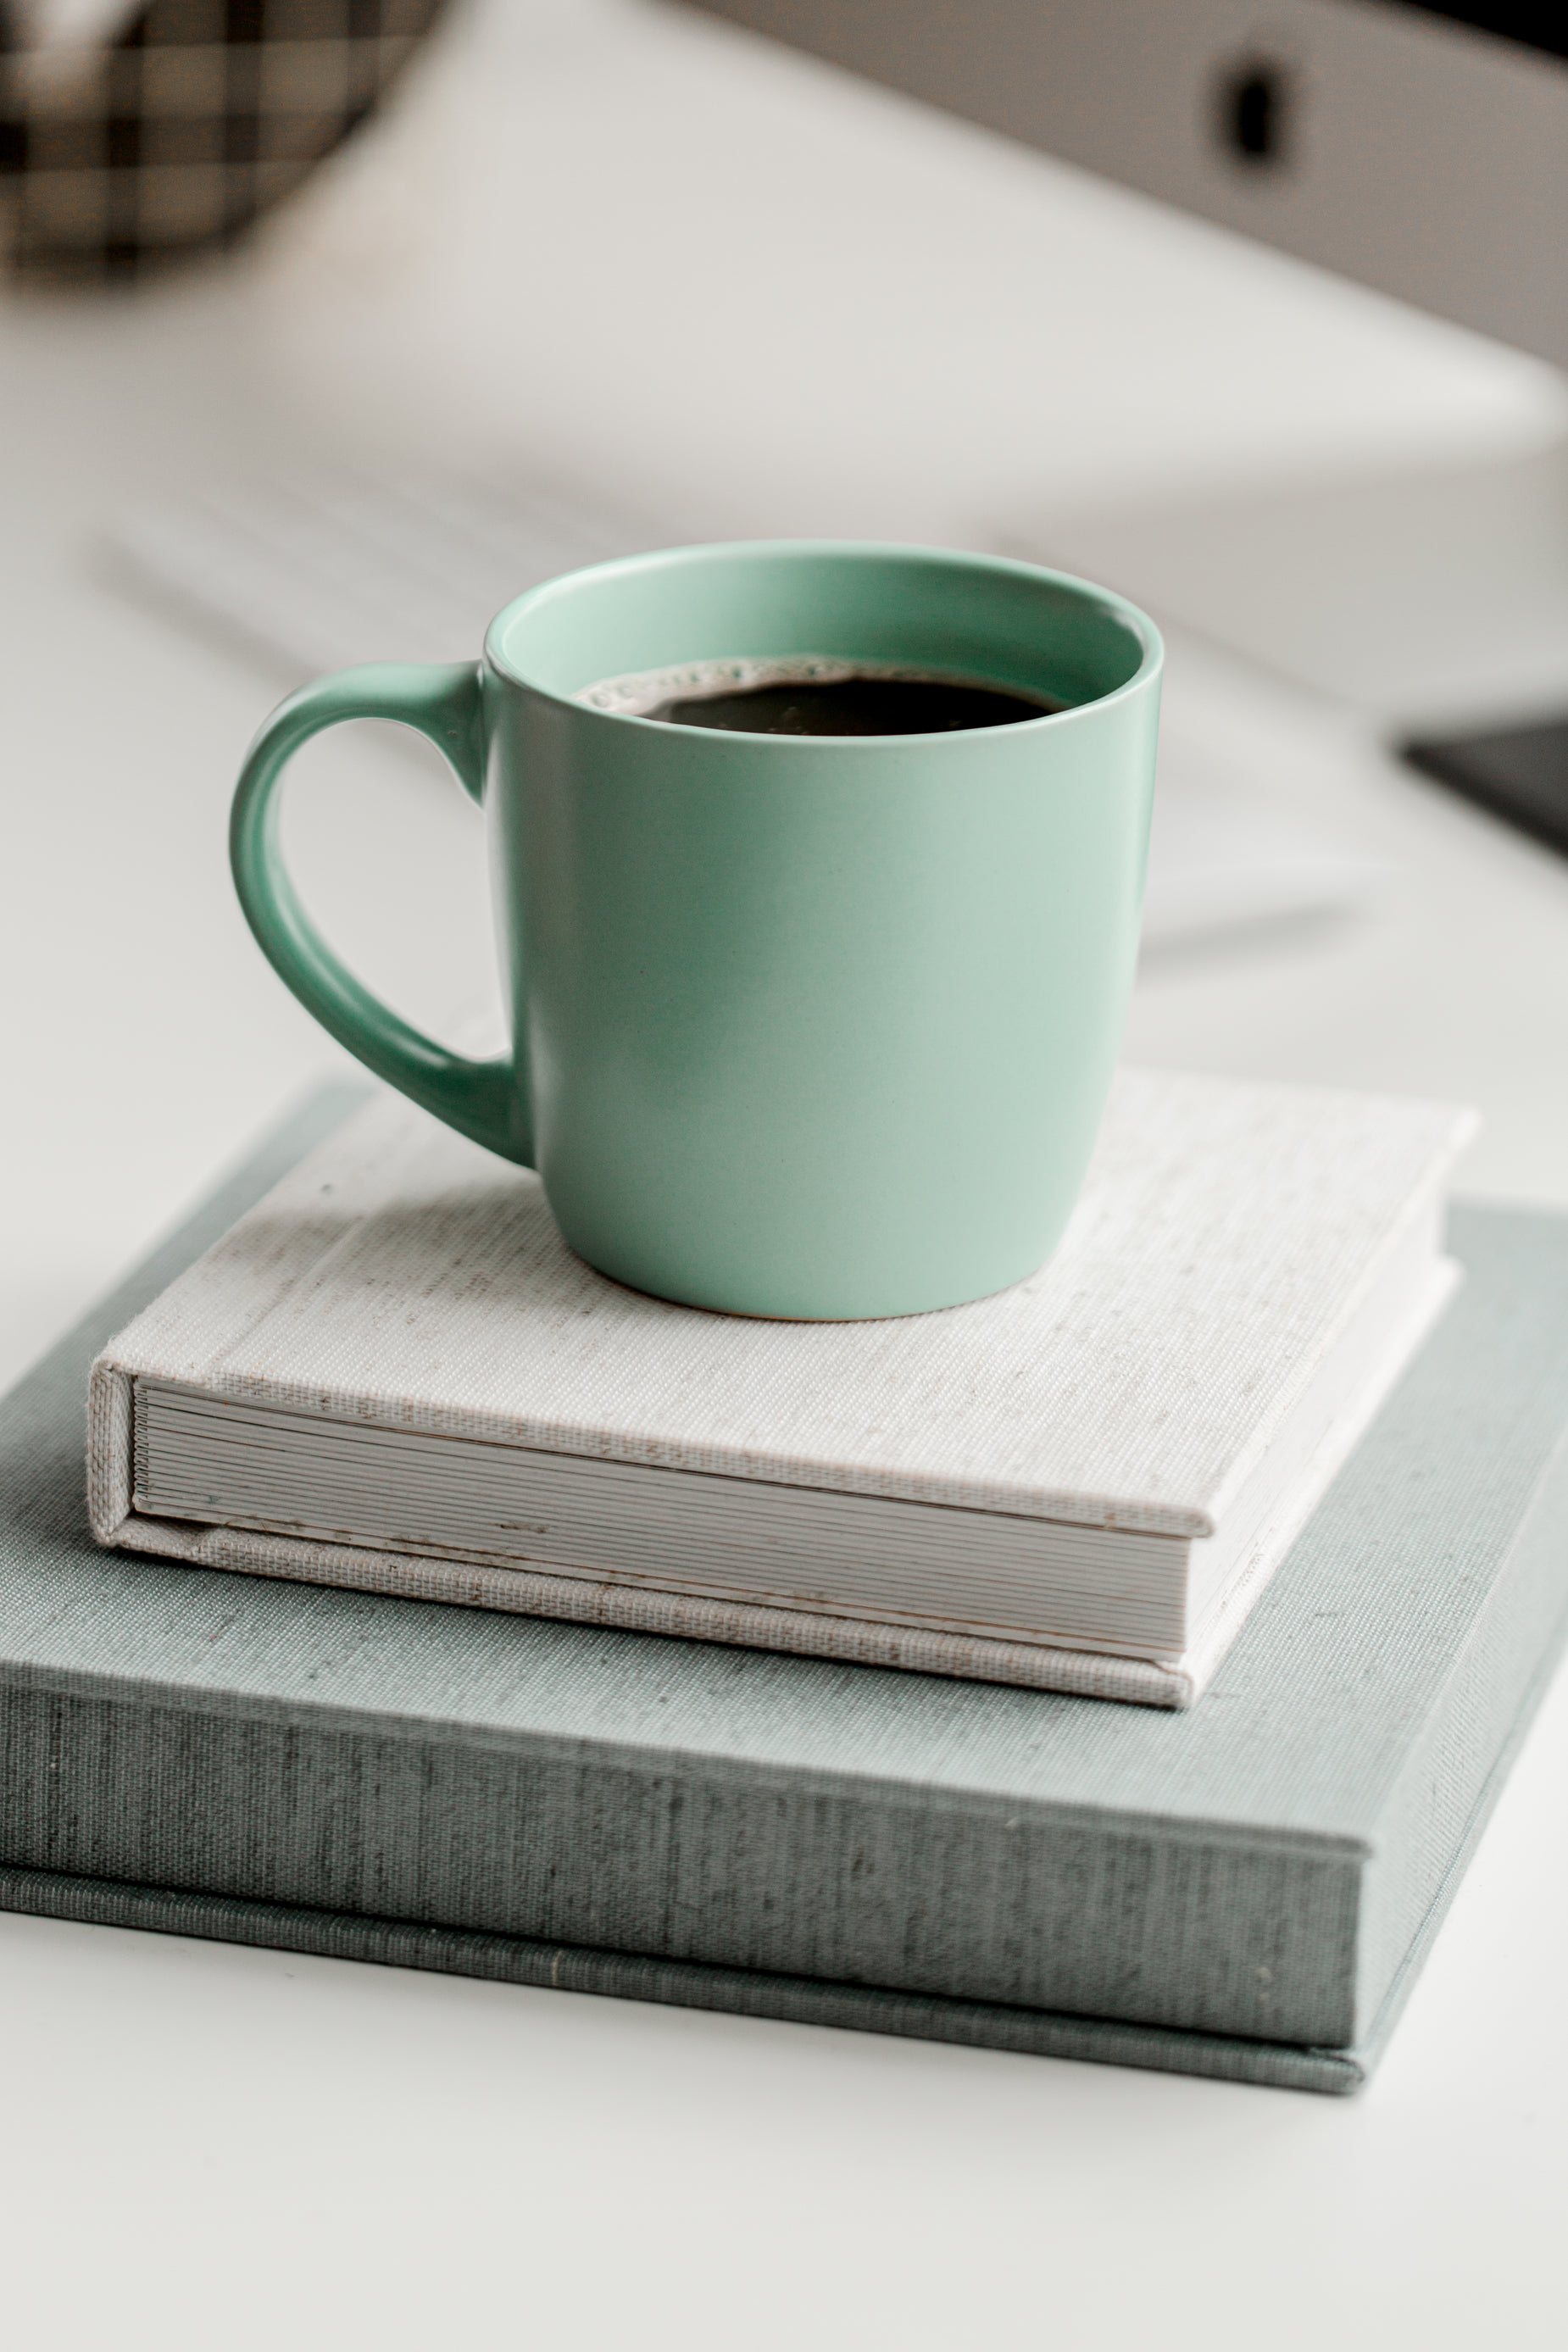 Browse Free HD Images of Mint Green Mug Full Of Black Coffee On Top Of